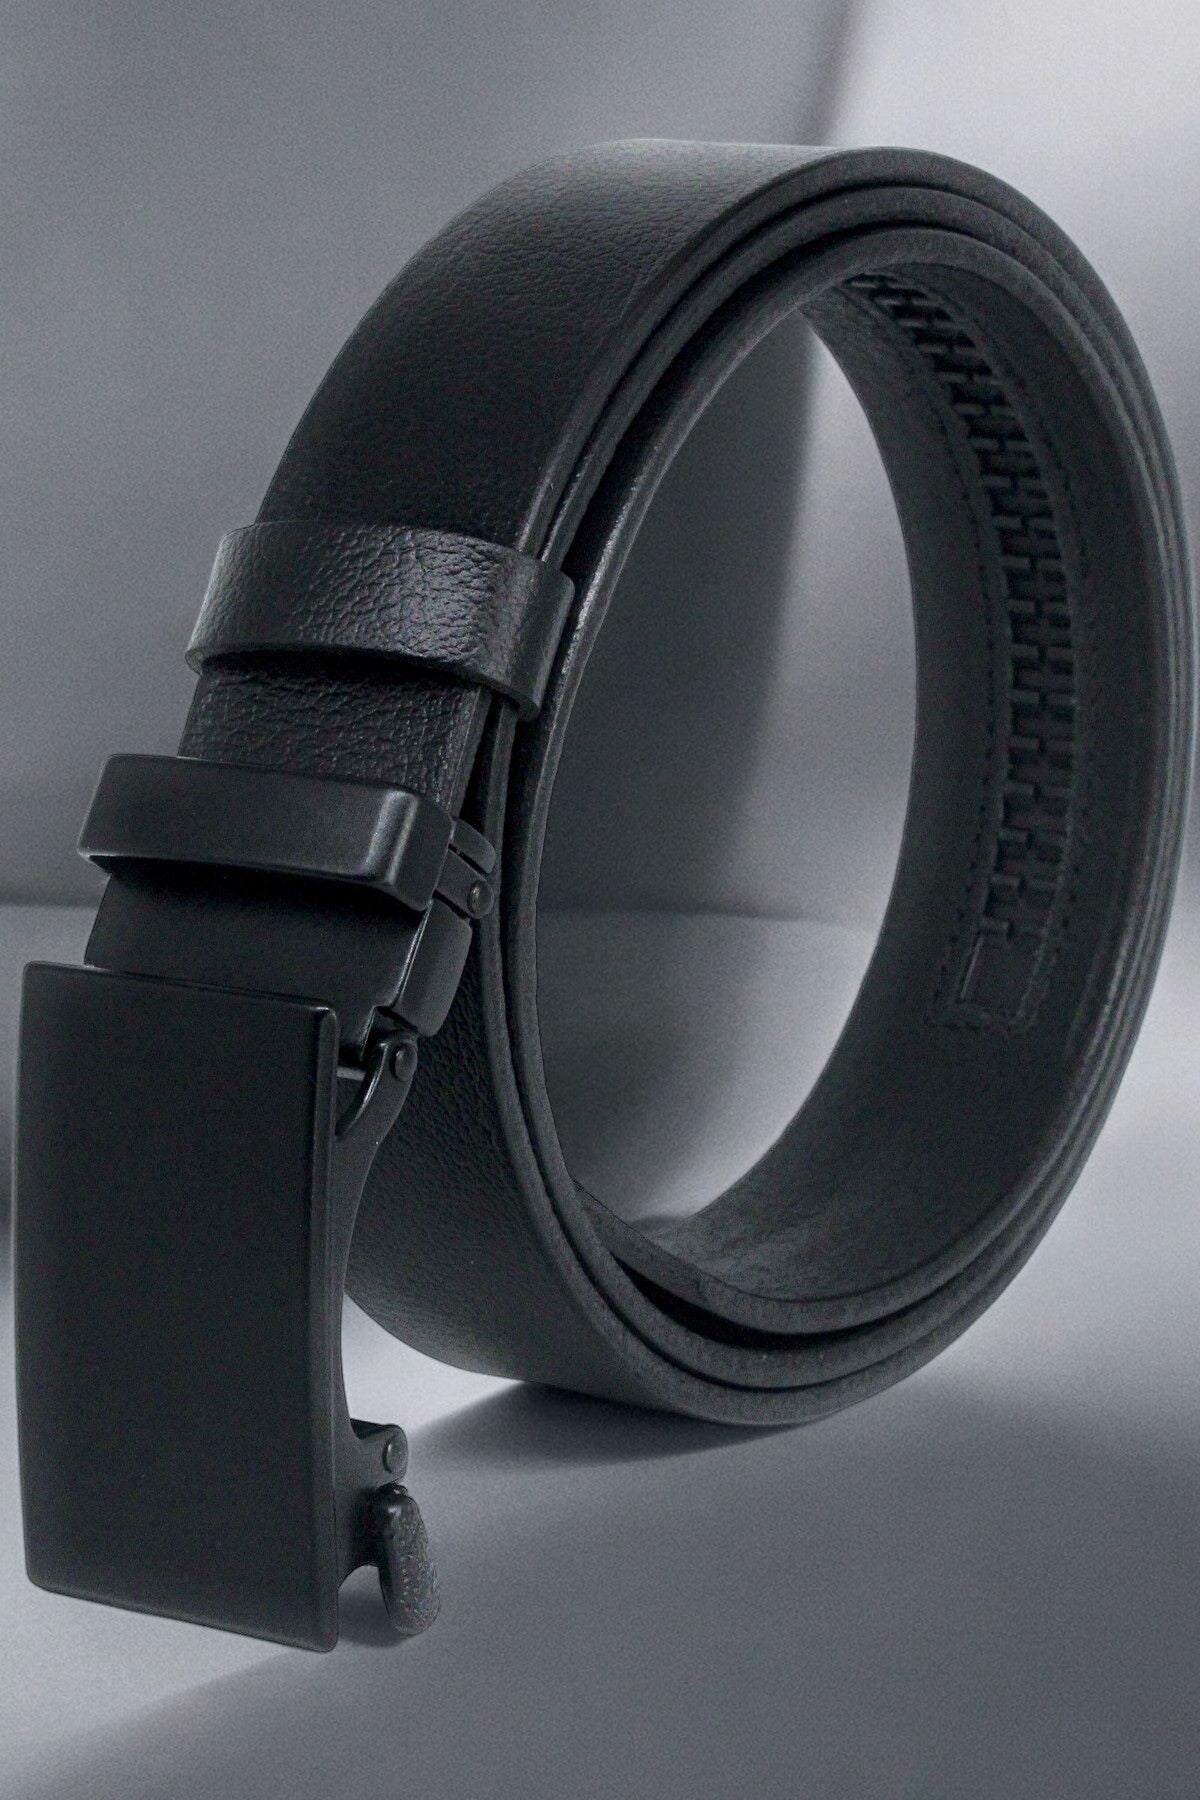 Handmade Leather Belt with Different Color Options  99percenthandmade 32" - 34" Waist inches (70cm-80cm)-Small Model 1 Black 